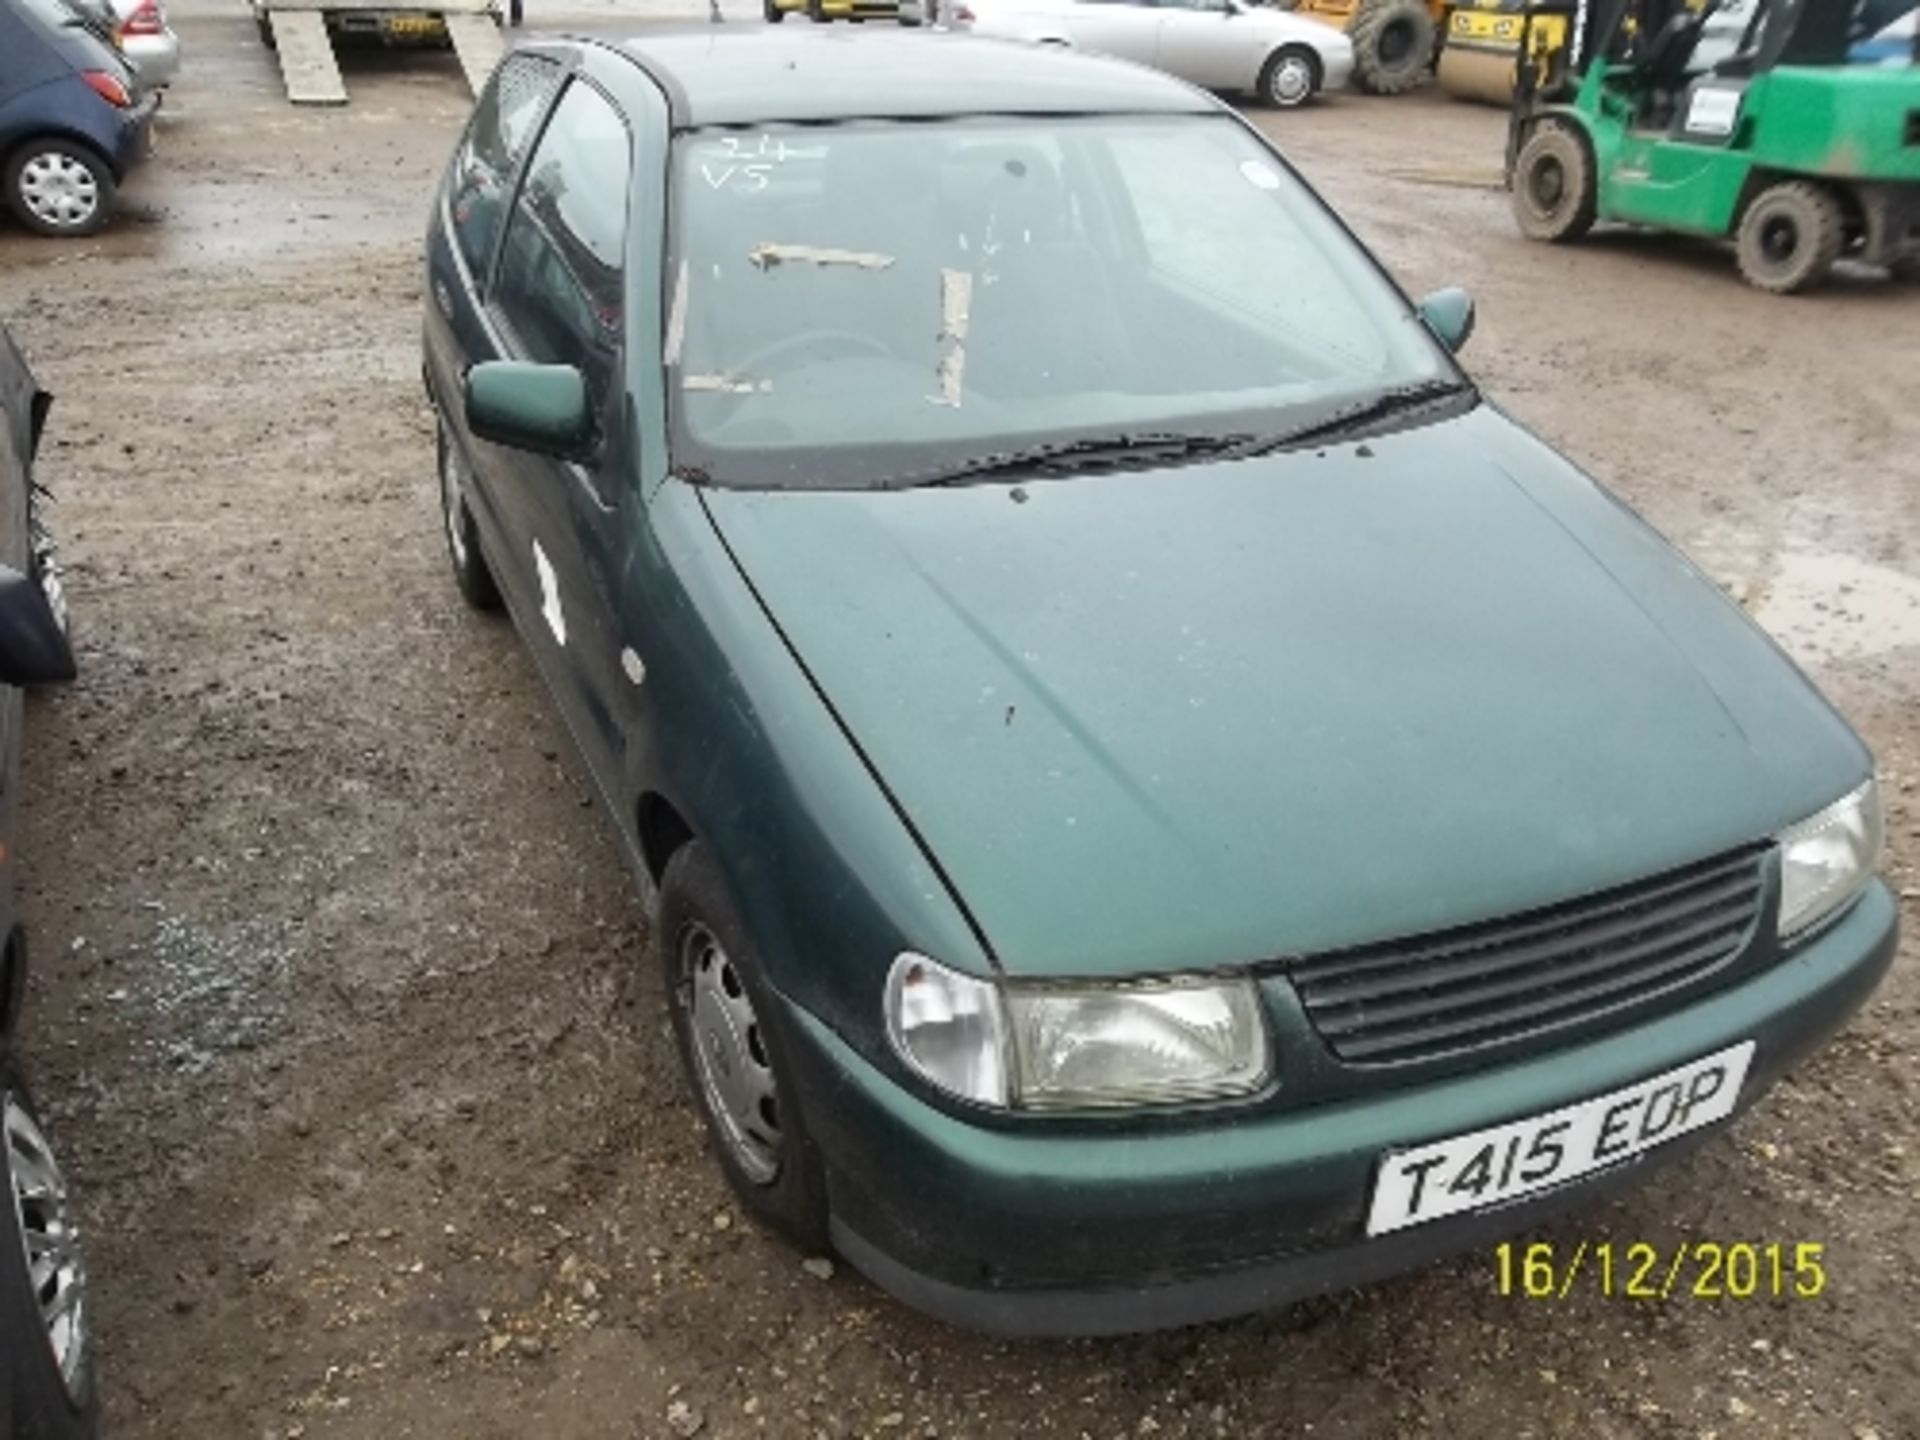 Volkswagen Polo 1.4 CL – T415 EDP
Date of registration:  24.05.1999
1390cc, petrol, manual, green - Image 2 of 4